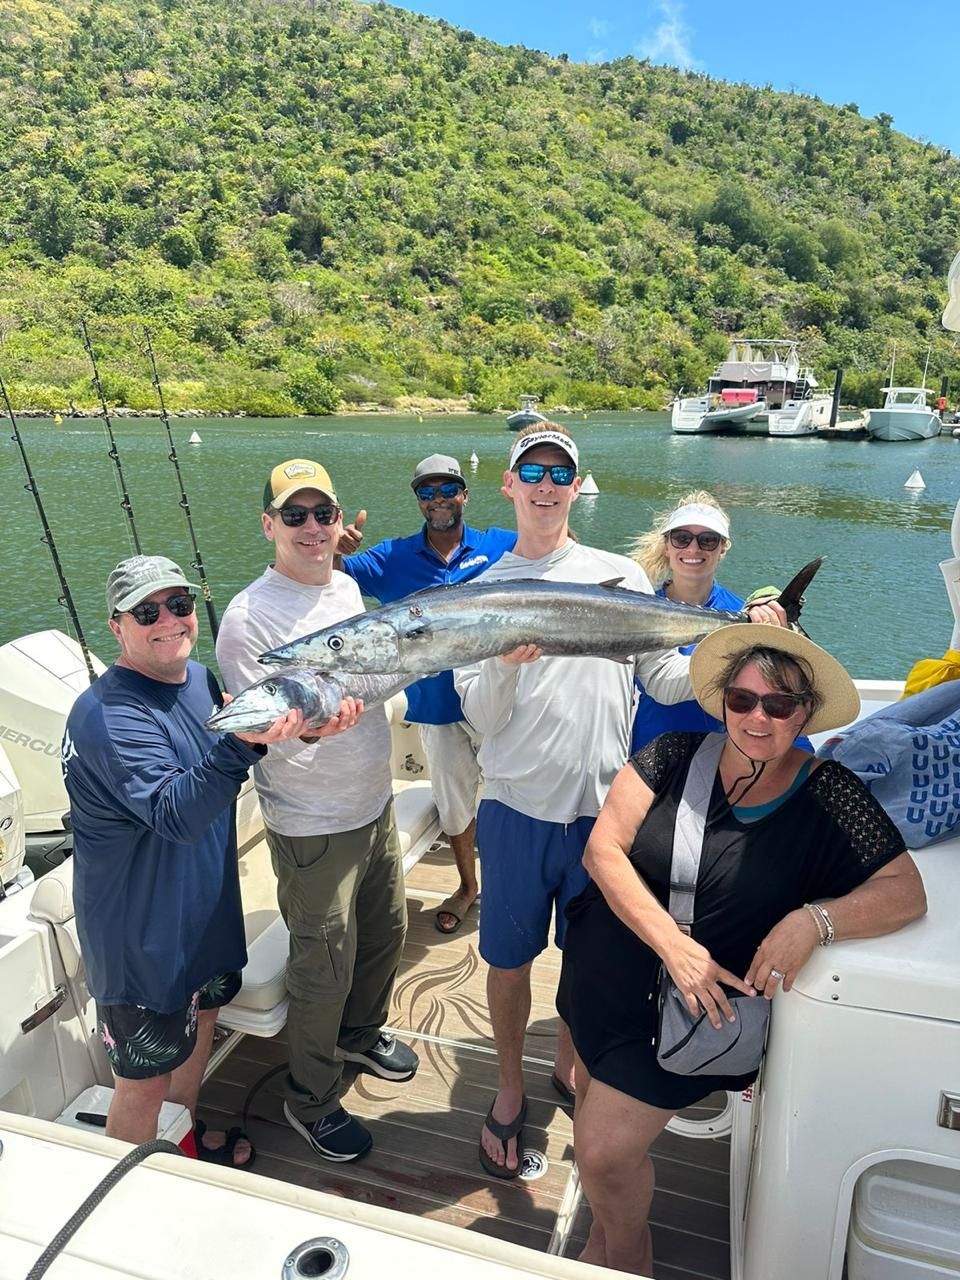 A group of people are standing on a boat holding a large fish.